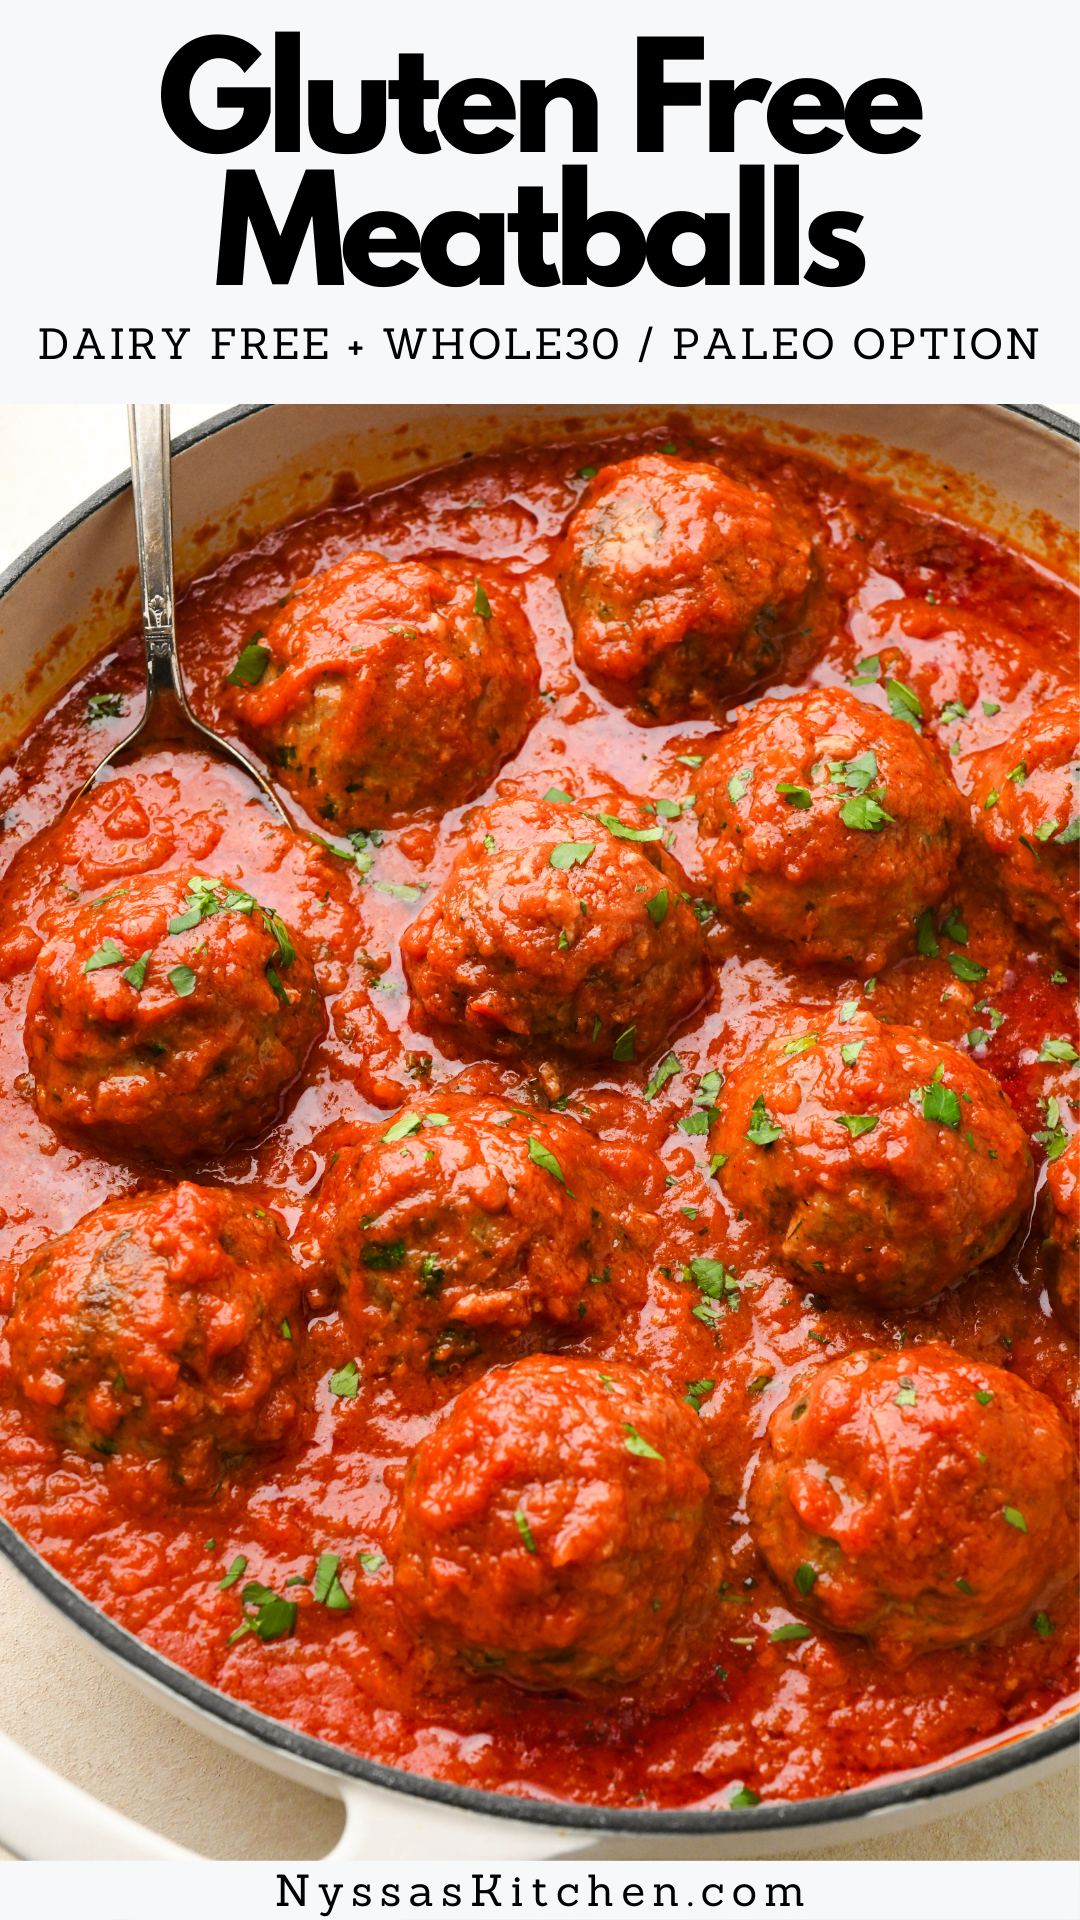 These gluten free meatballs are the perfect healthy comfort food! Made without breadcrumbs and just a handful of simple ingredients like ground beef, ground pork, almond flour, onions, parsley, and a flavorful blend of seasonings. The perfect thing to make when you're craving a hearty Italian inspired dinner! Gluten free, dairy free, paleo, Whole30 option.